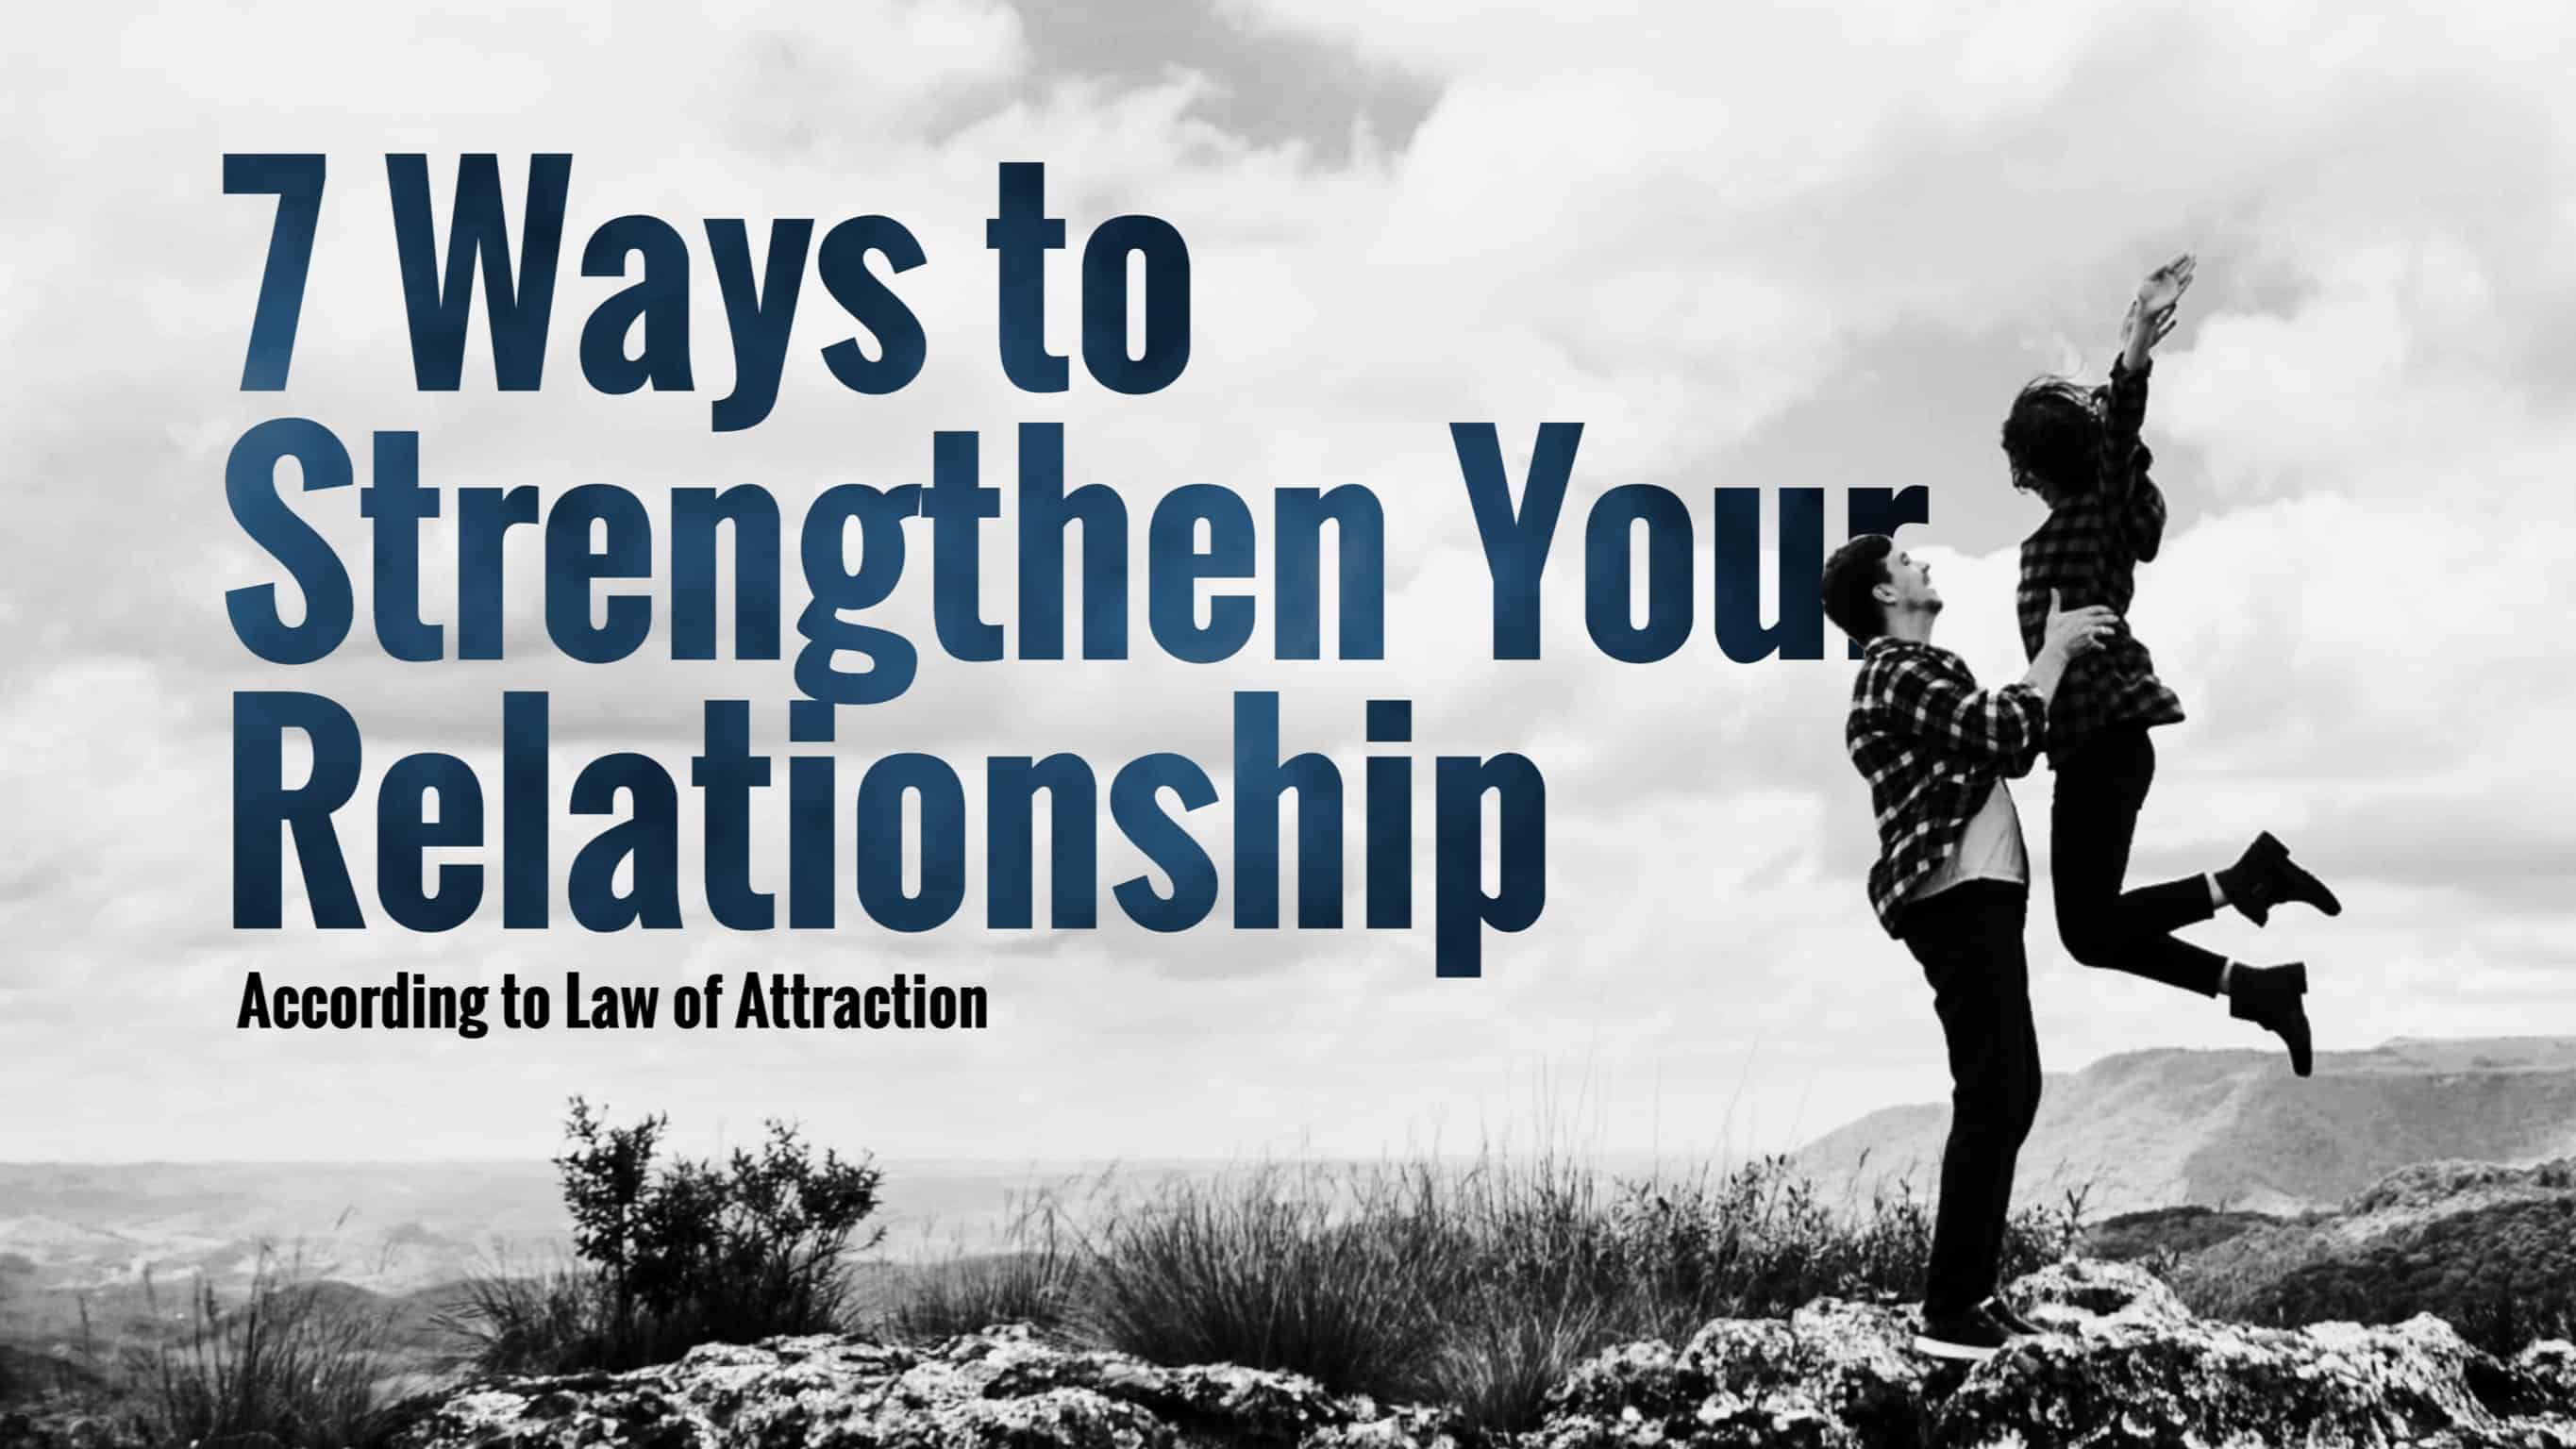 7 Ways to Strengthen Your Relationship, According to Law of Attraction